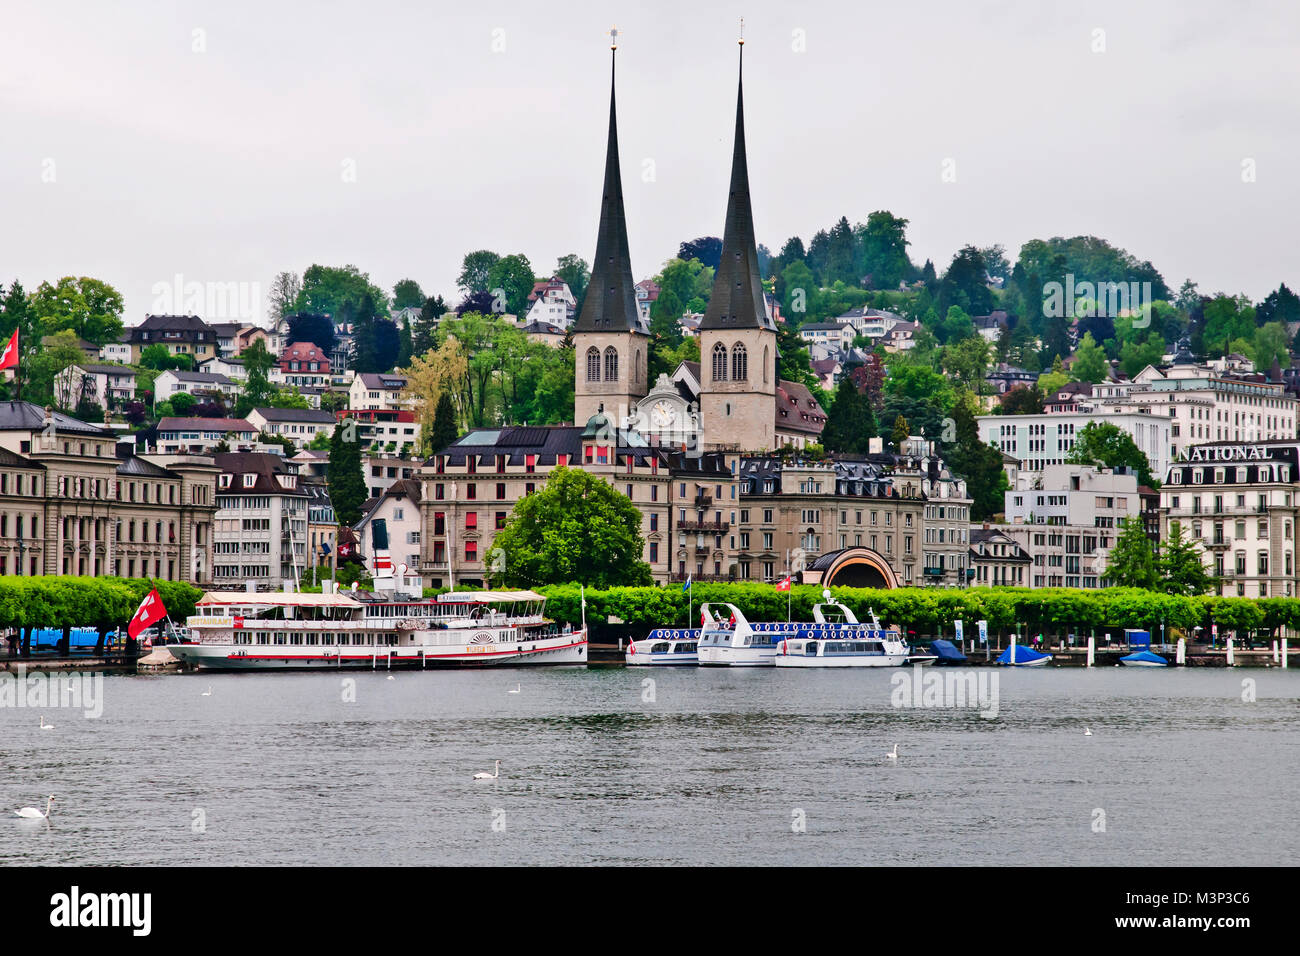 The Abbey Court Church in rainy day, Lucerne, Switzerland, Europe. Stock Photo